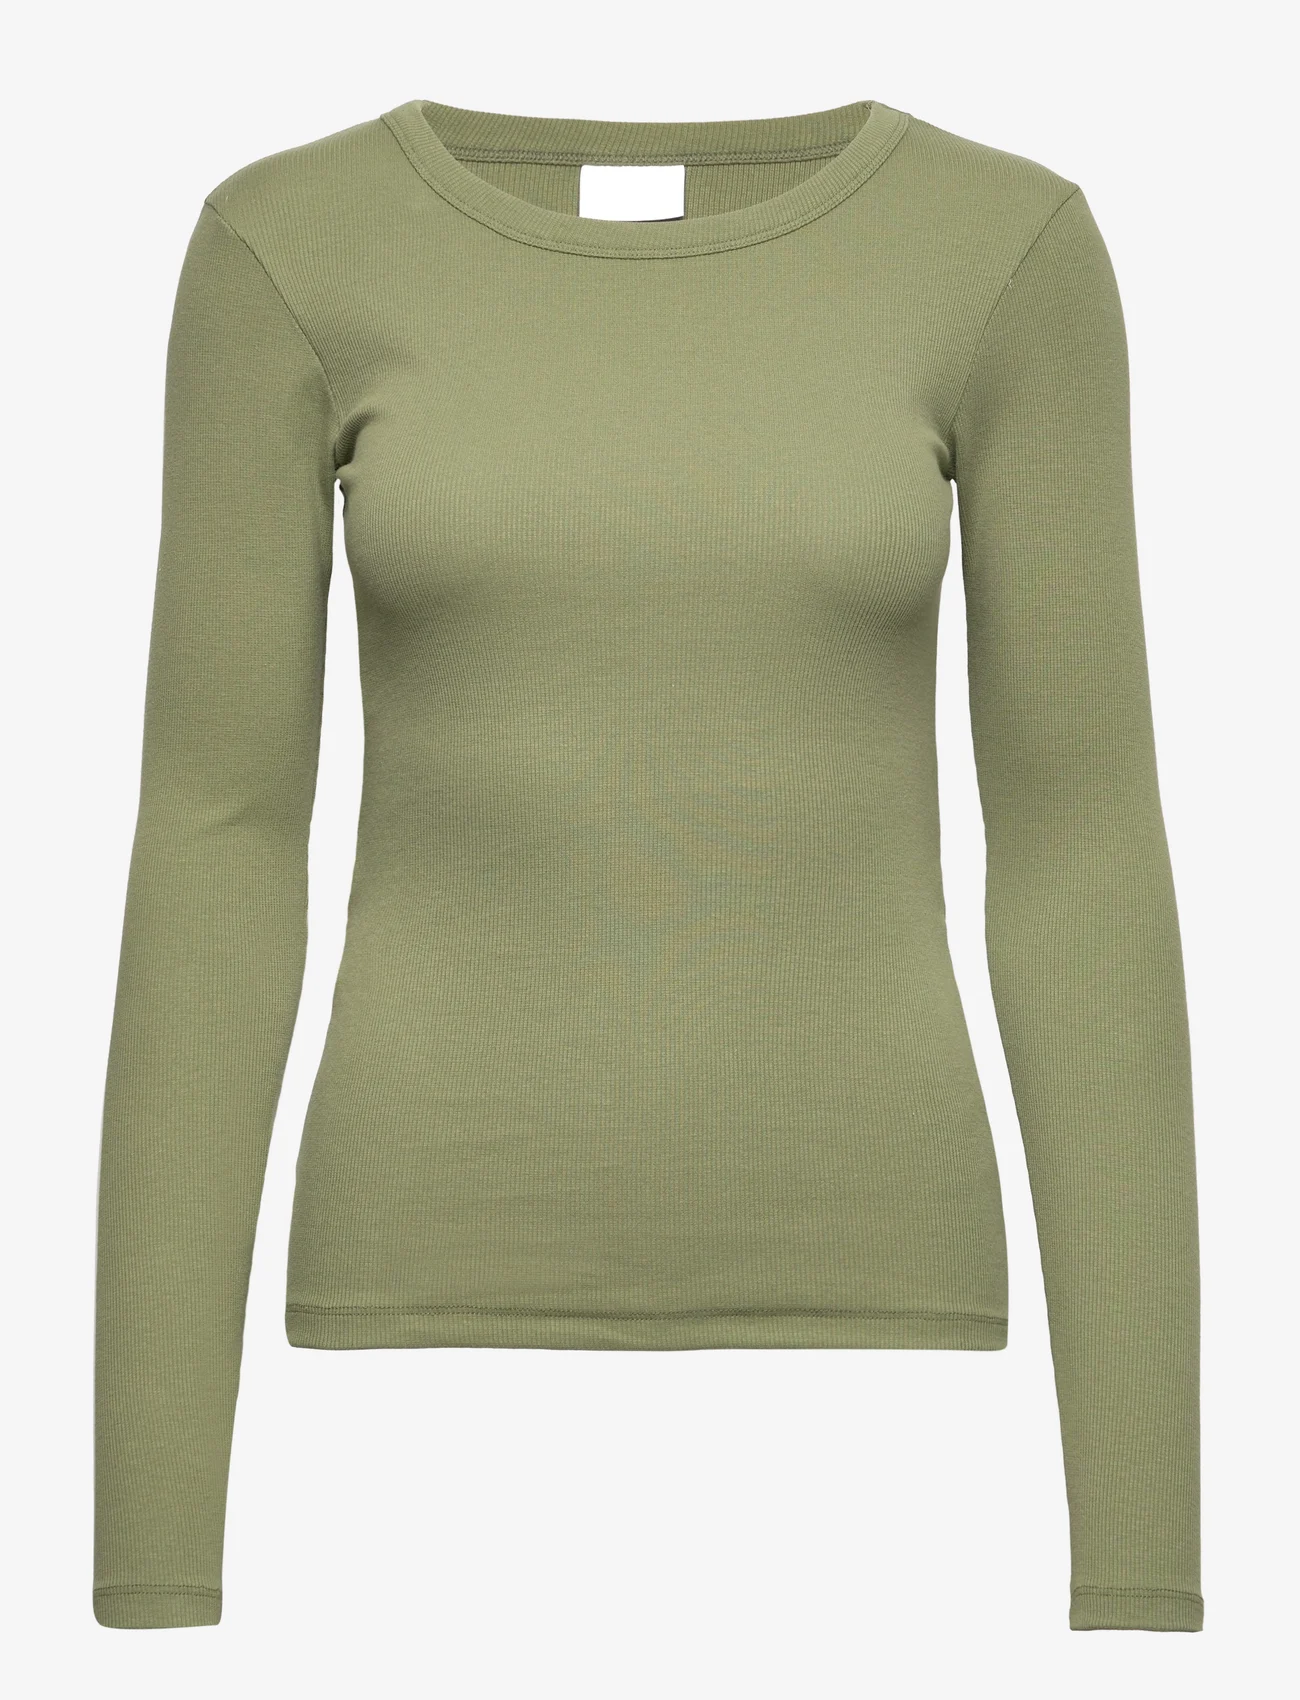 2NDDAY - 2ND Pale TT - Daily Cotton Rib - long-sleeved tops - olivine - 0